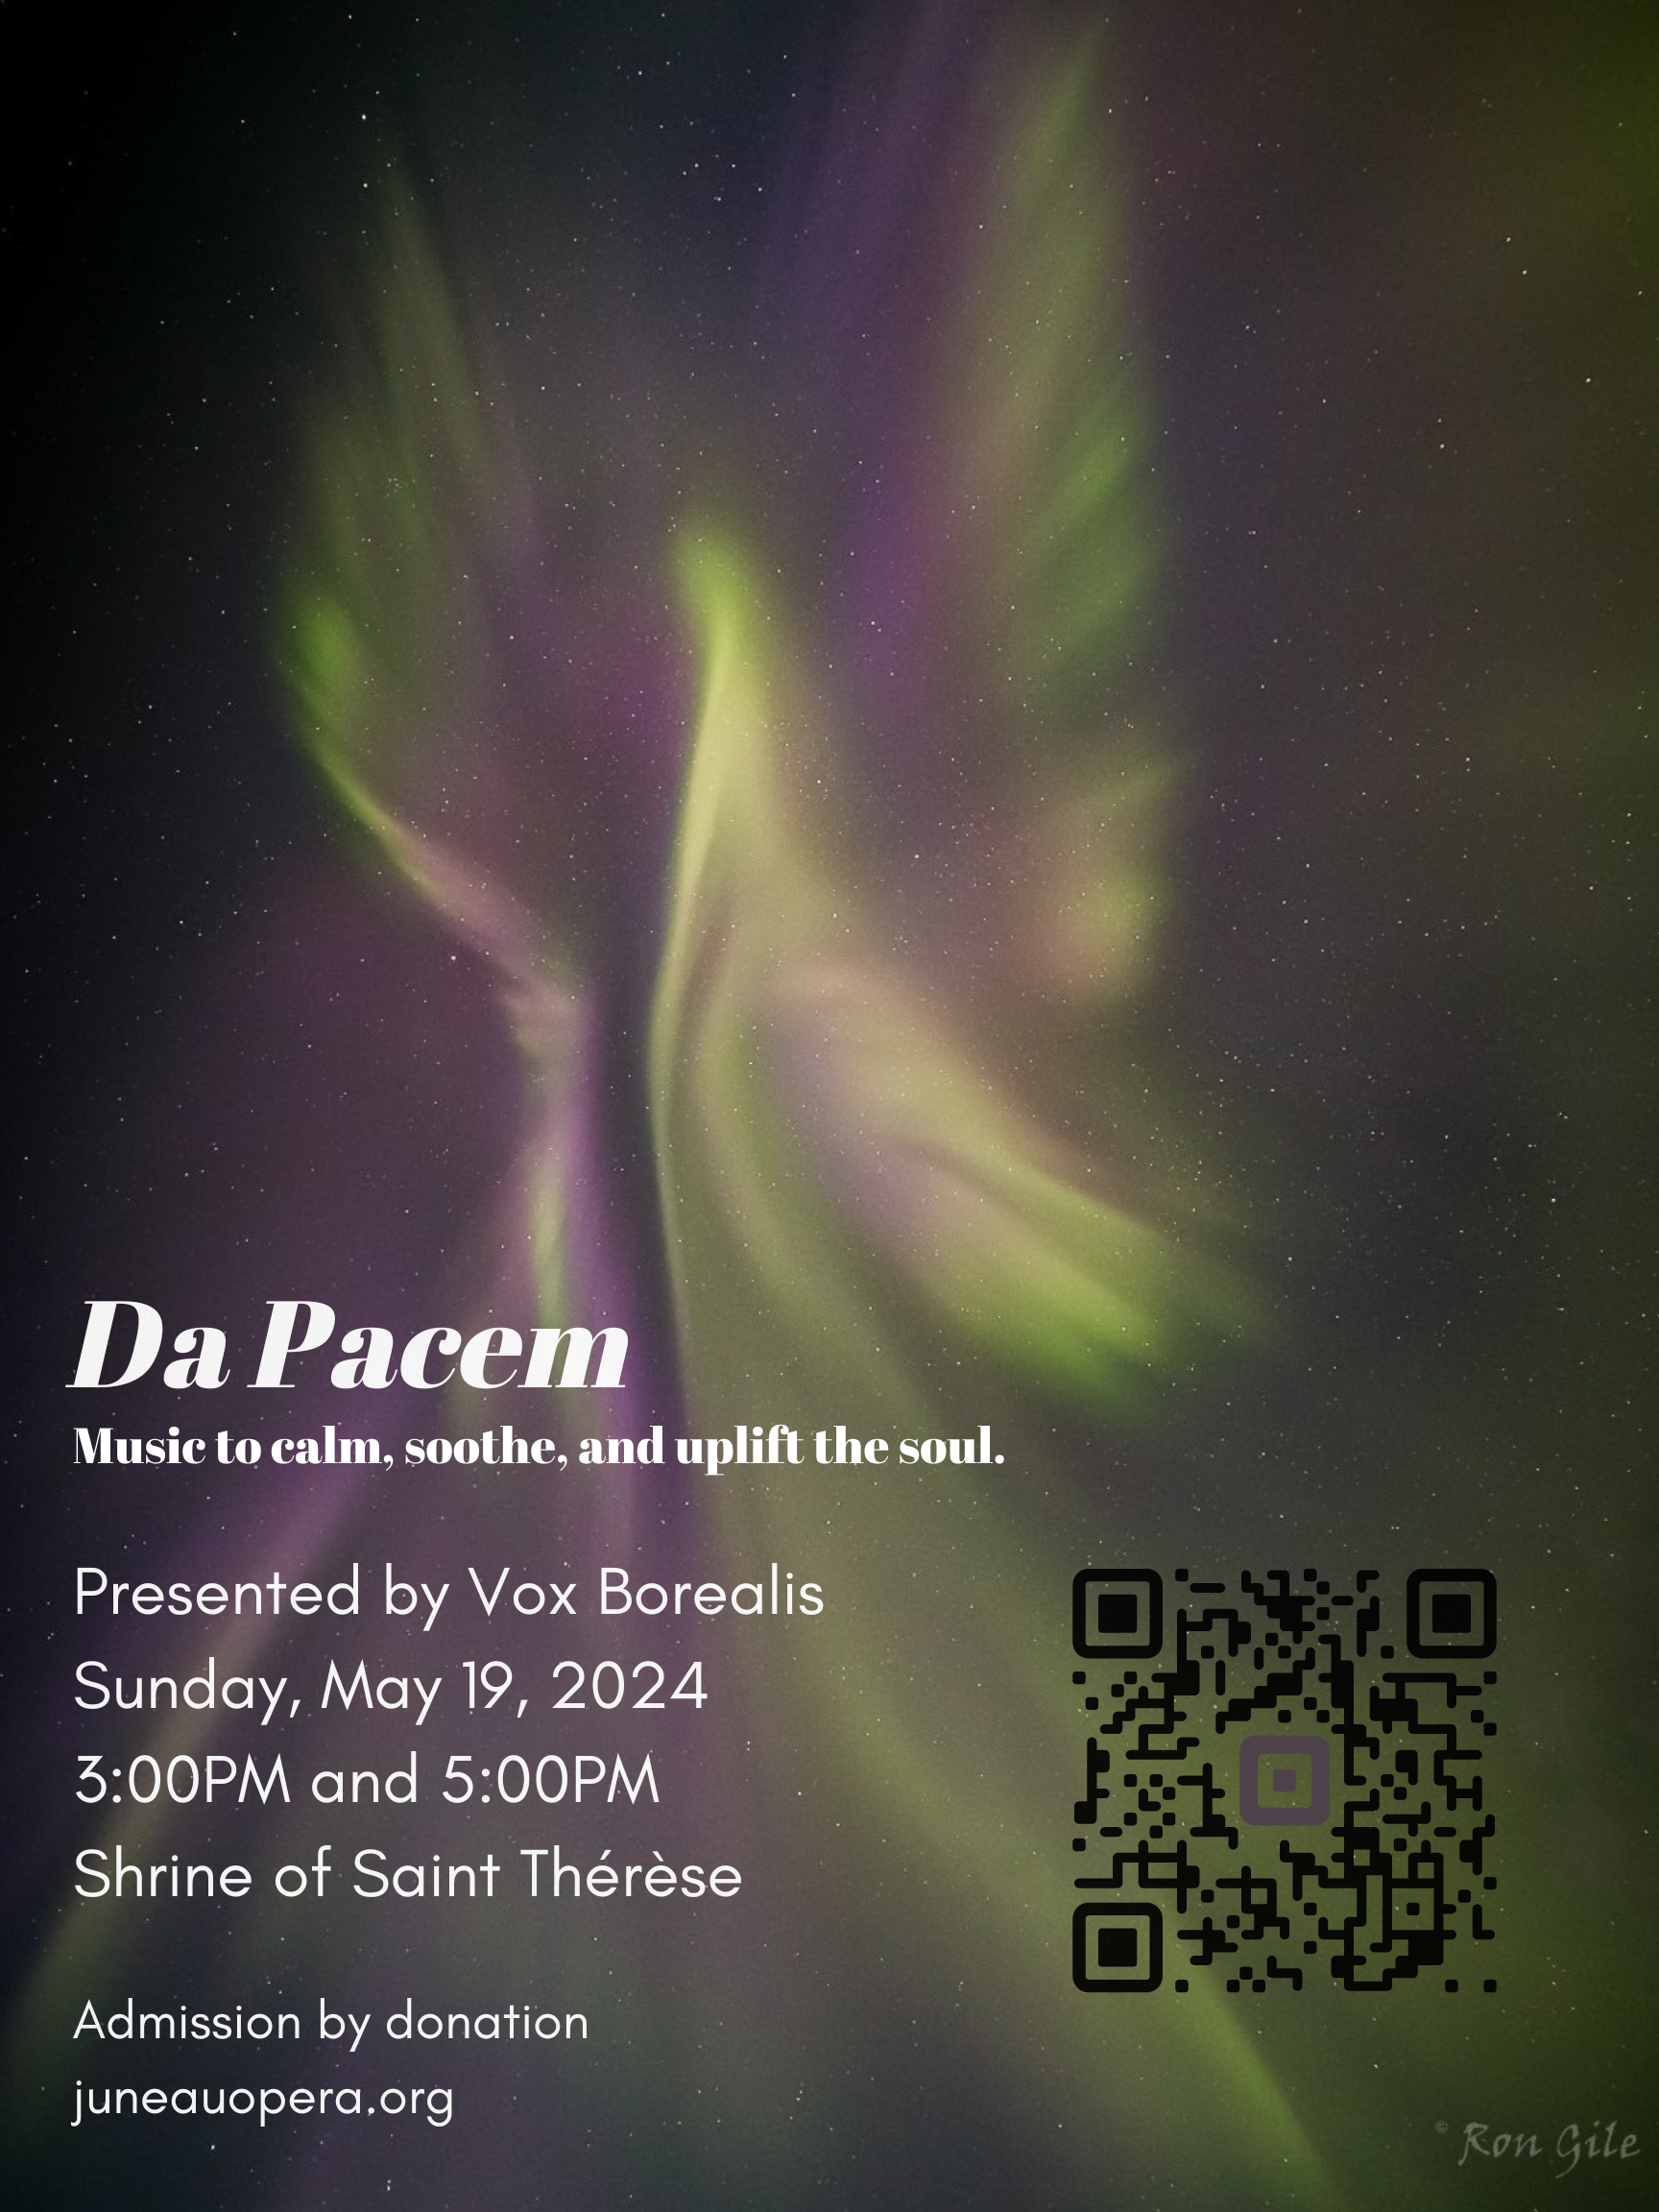 Da Pacem – music to soothe and uplift the soul.